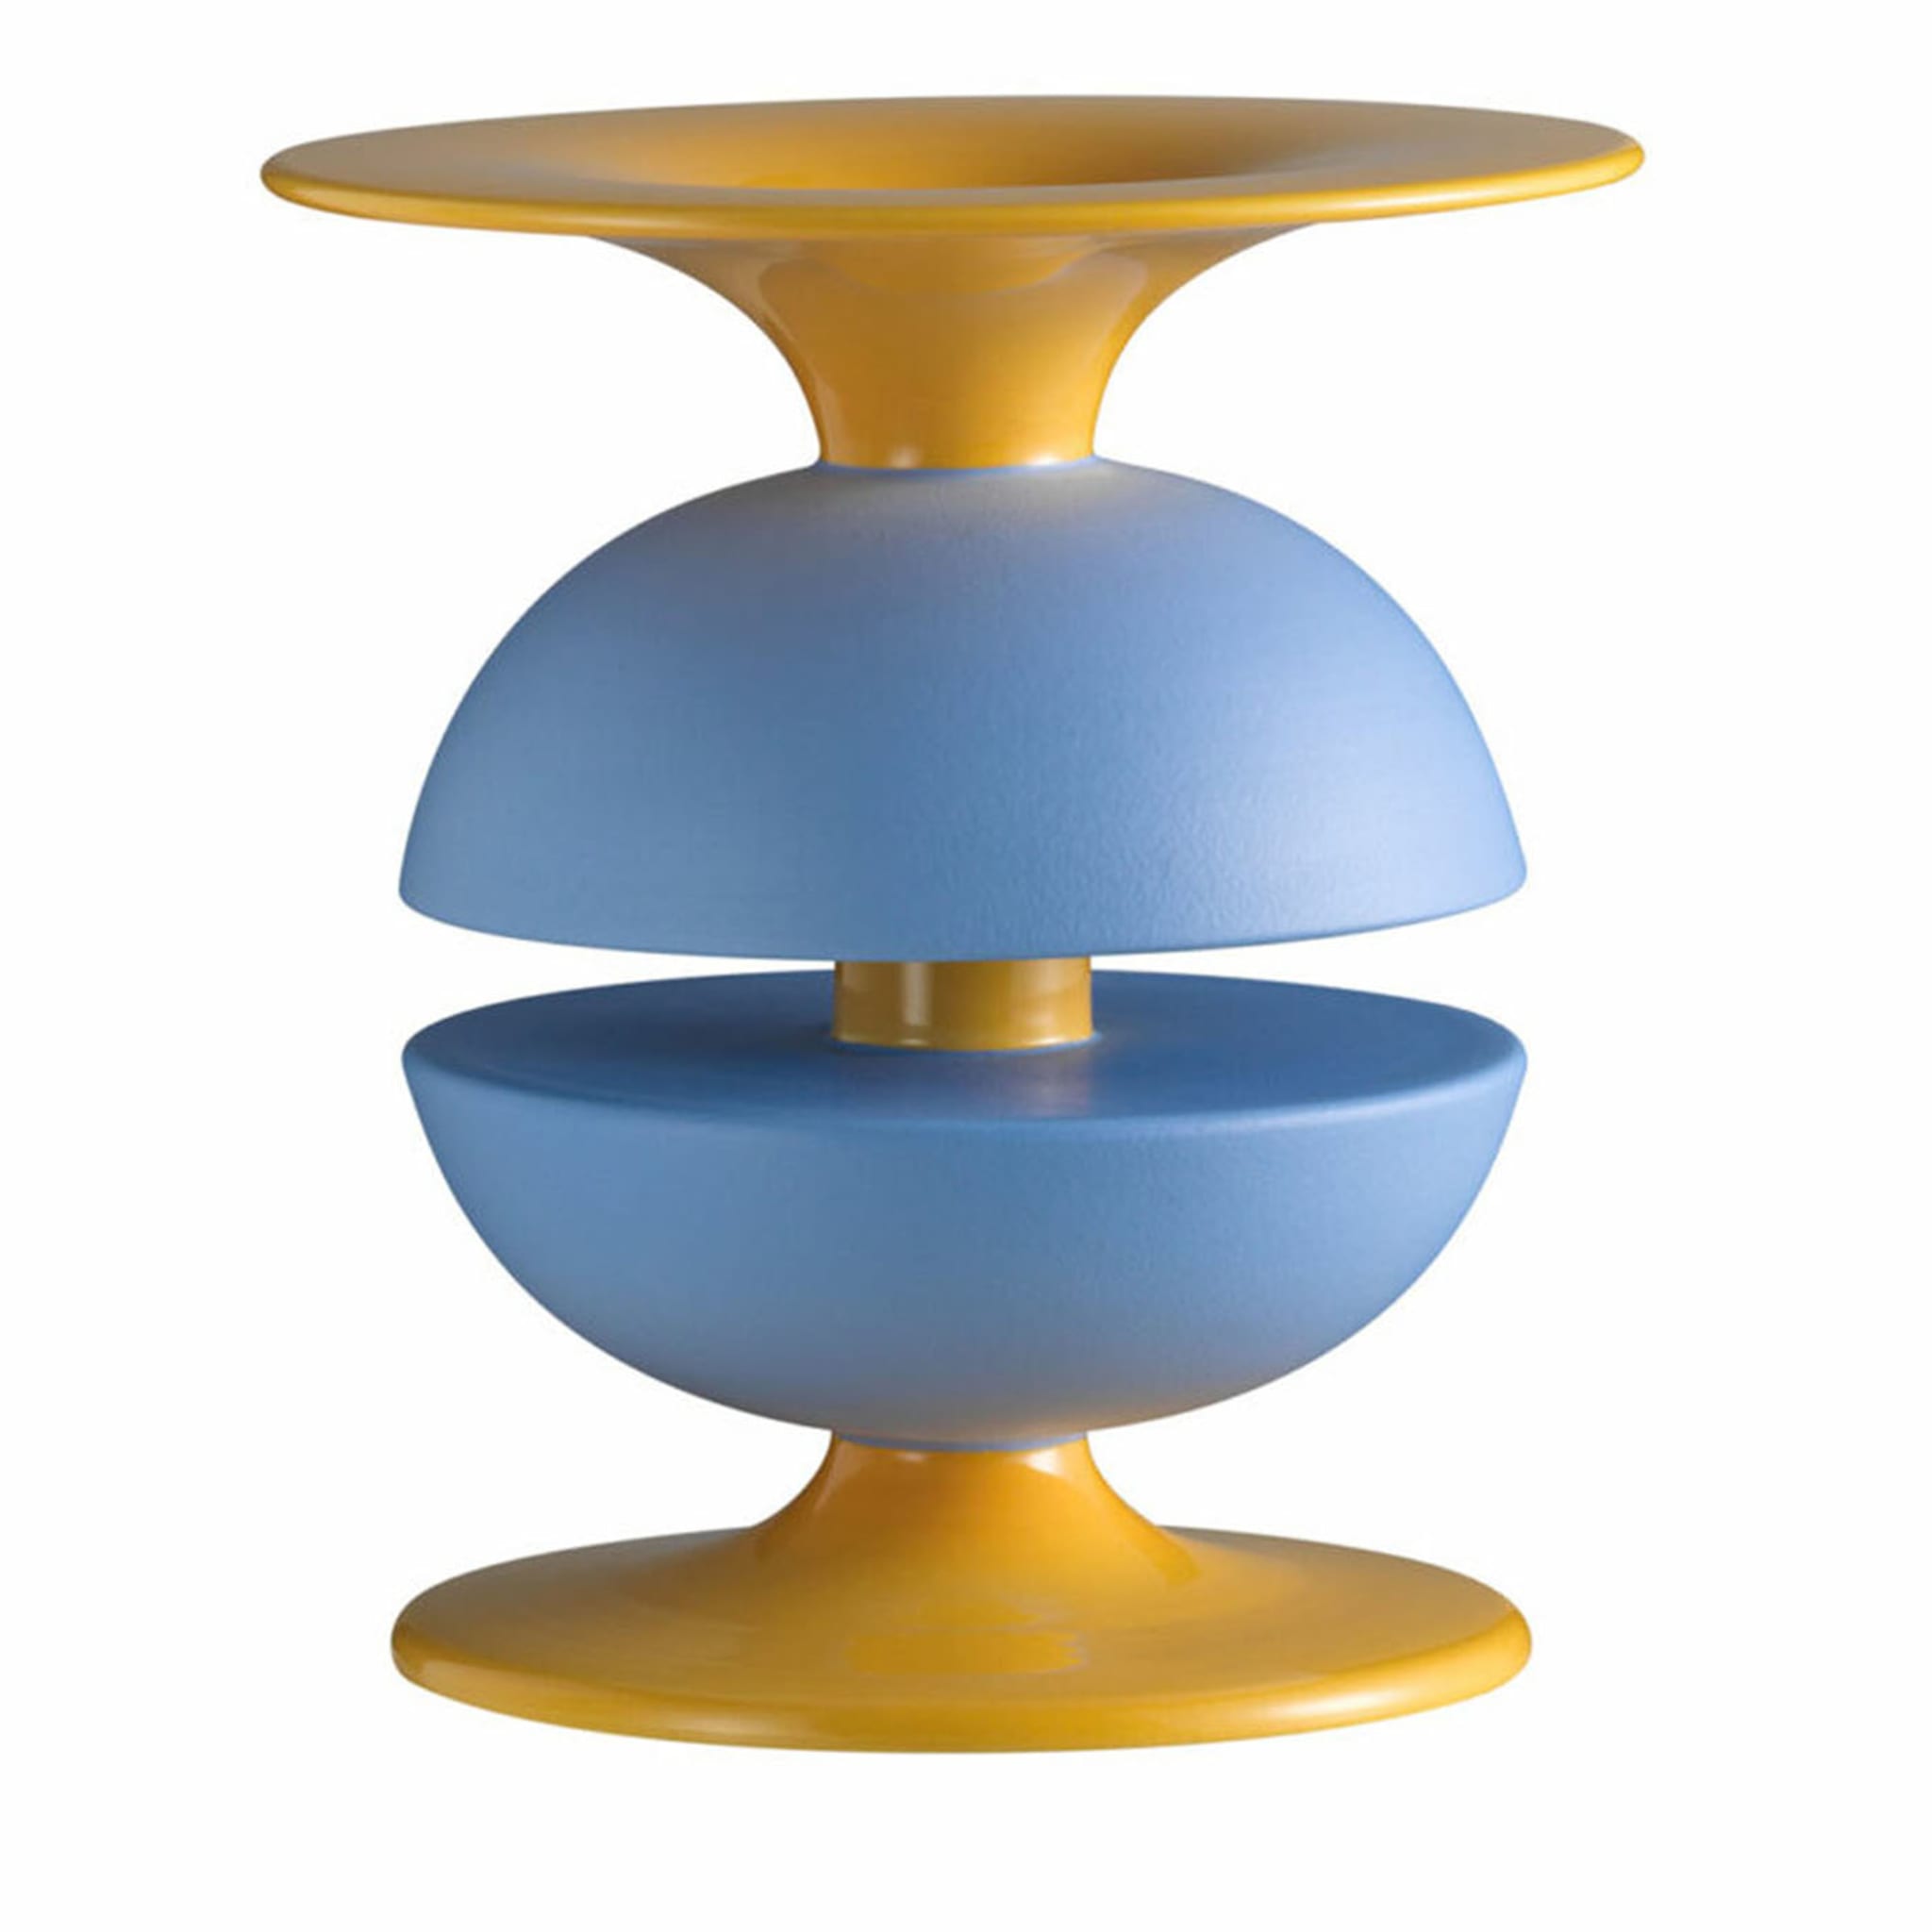 Atmosphère Yellow Vase - Main view